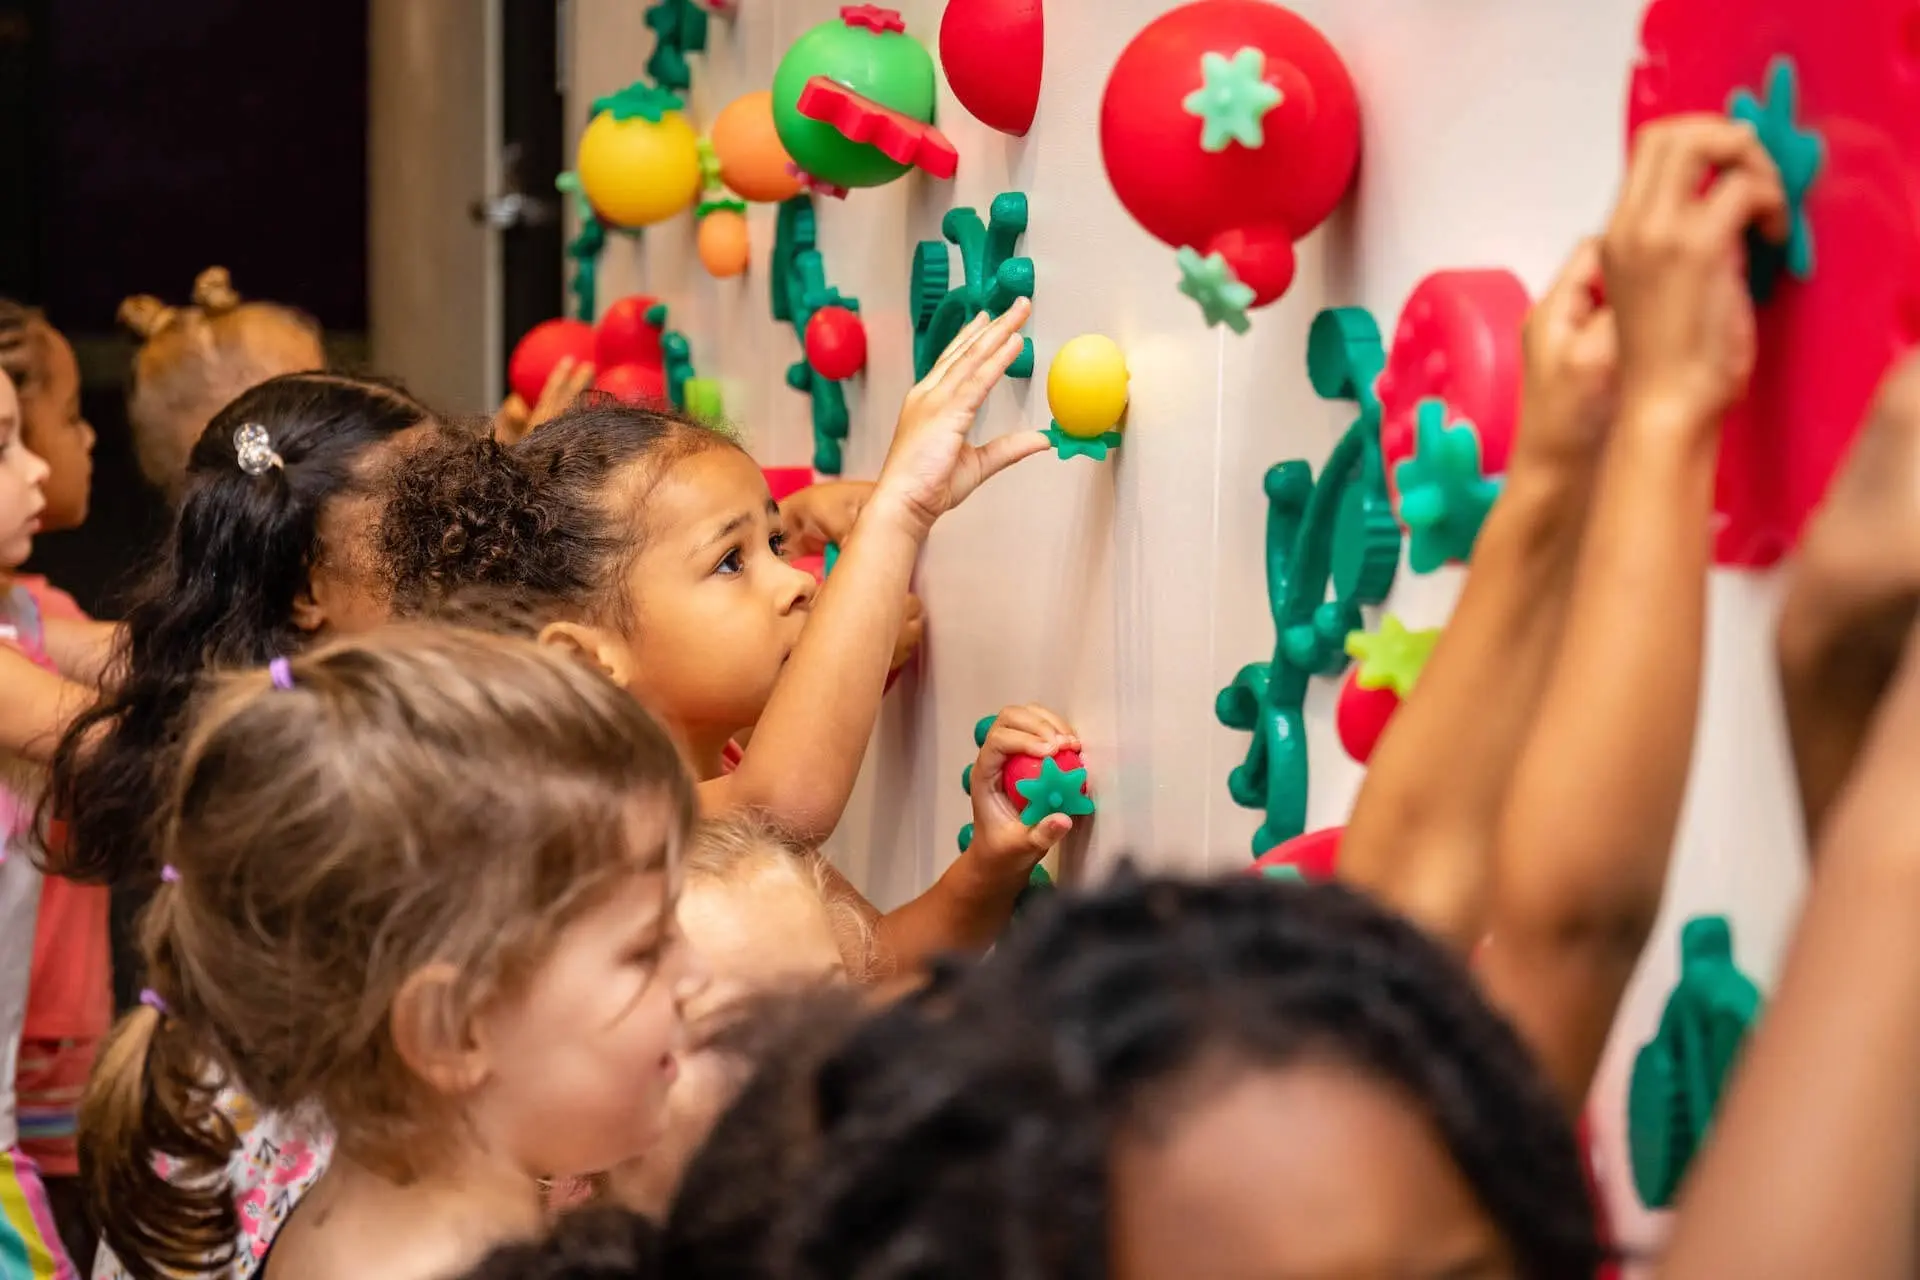 group of young children touching silicone objects in the shape of fruits and vegetables mounted on a wall